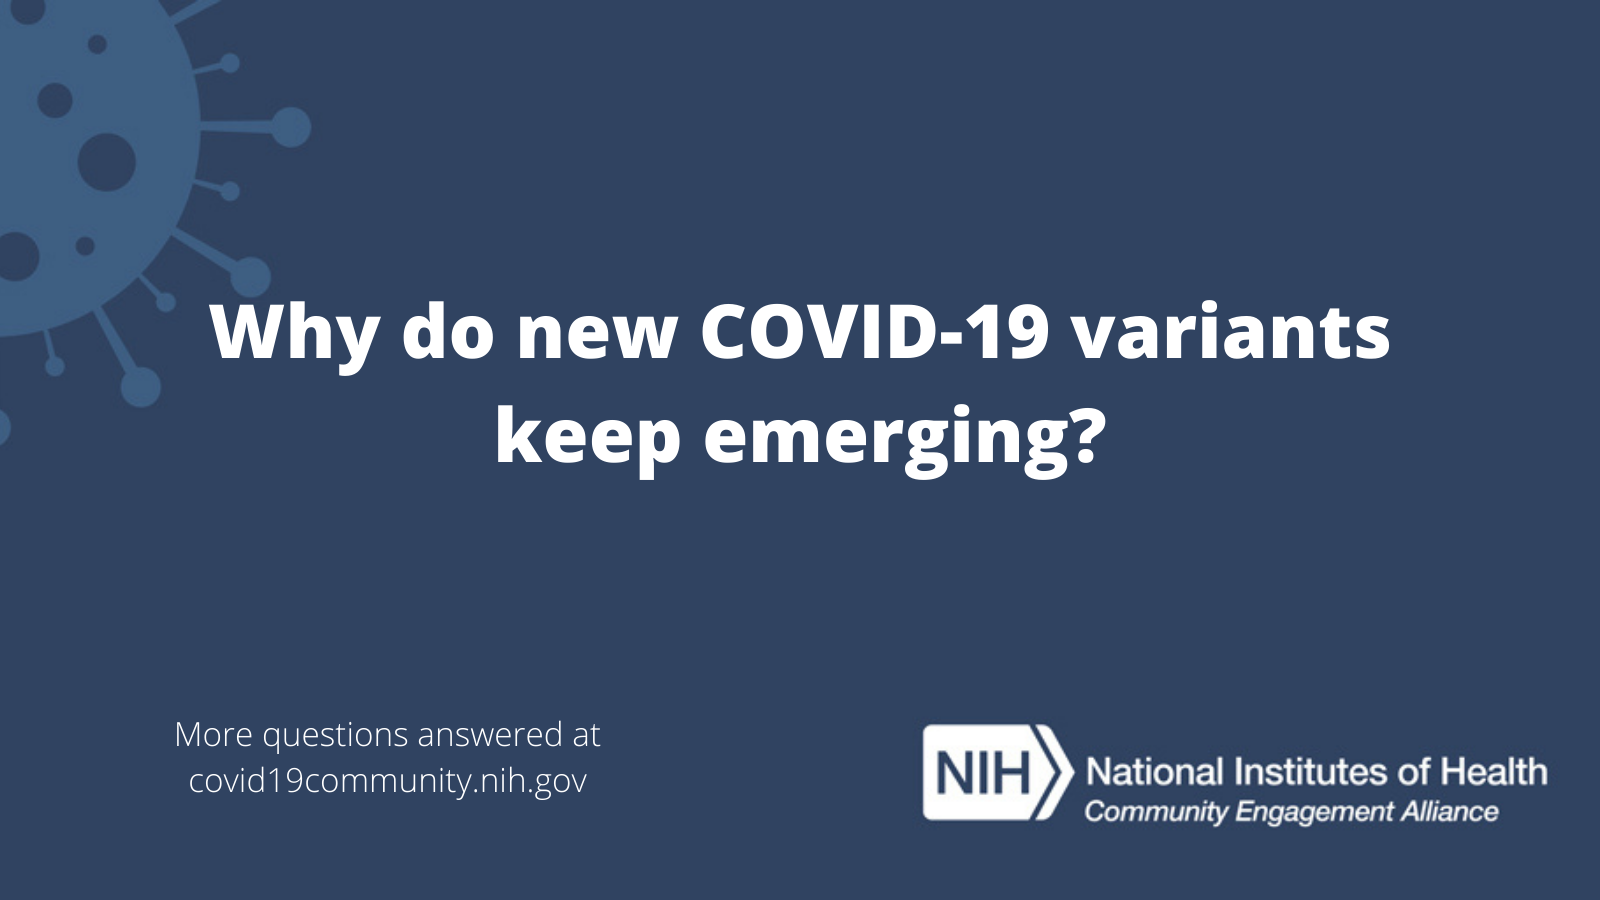 Why do new COVID-19 variants keep emerging? More vaccine questions answered at covid19community.nih.gov